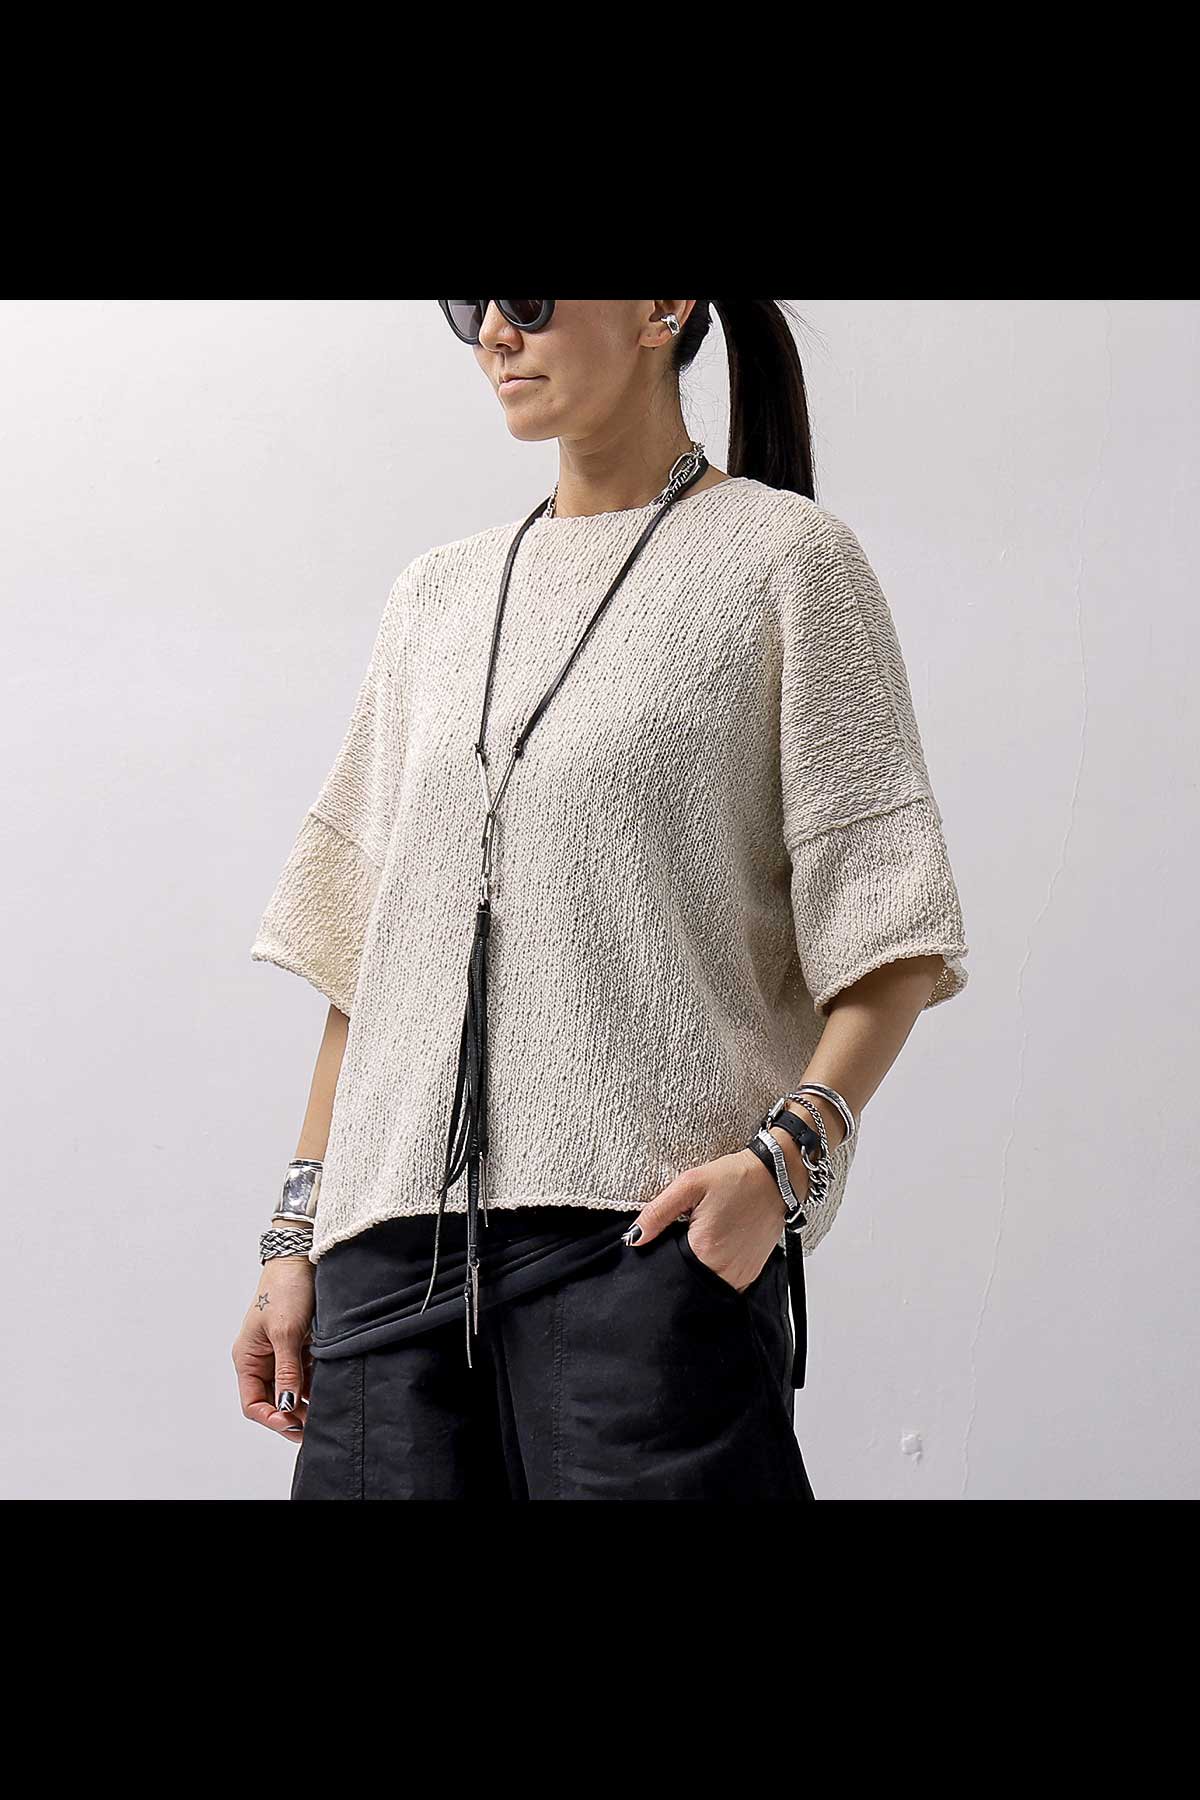 <img class='new_mark_img1' src='https://img.shop-pro.jp/img/new/icons8.gif' style='border:none;display:inline;margin:0px;padding:0px;width:auto;' />UNISEX COTTON LINEN KNIT HALF-SLEEVE TOP BZB1636_WHITE SAND